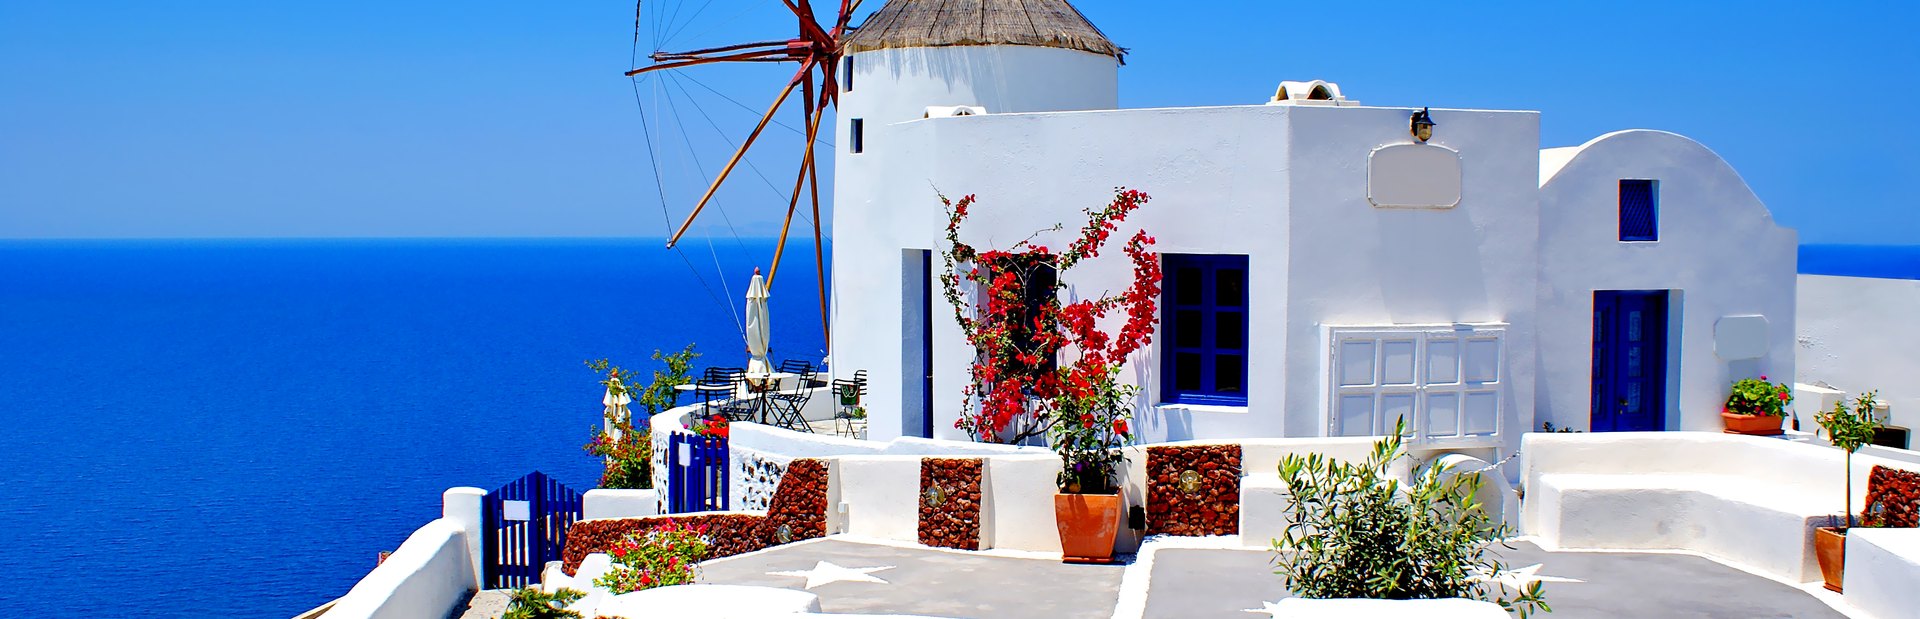 Discovering Sifnos: The Small Island behind Modern Greek Cuisine